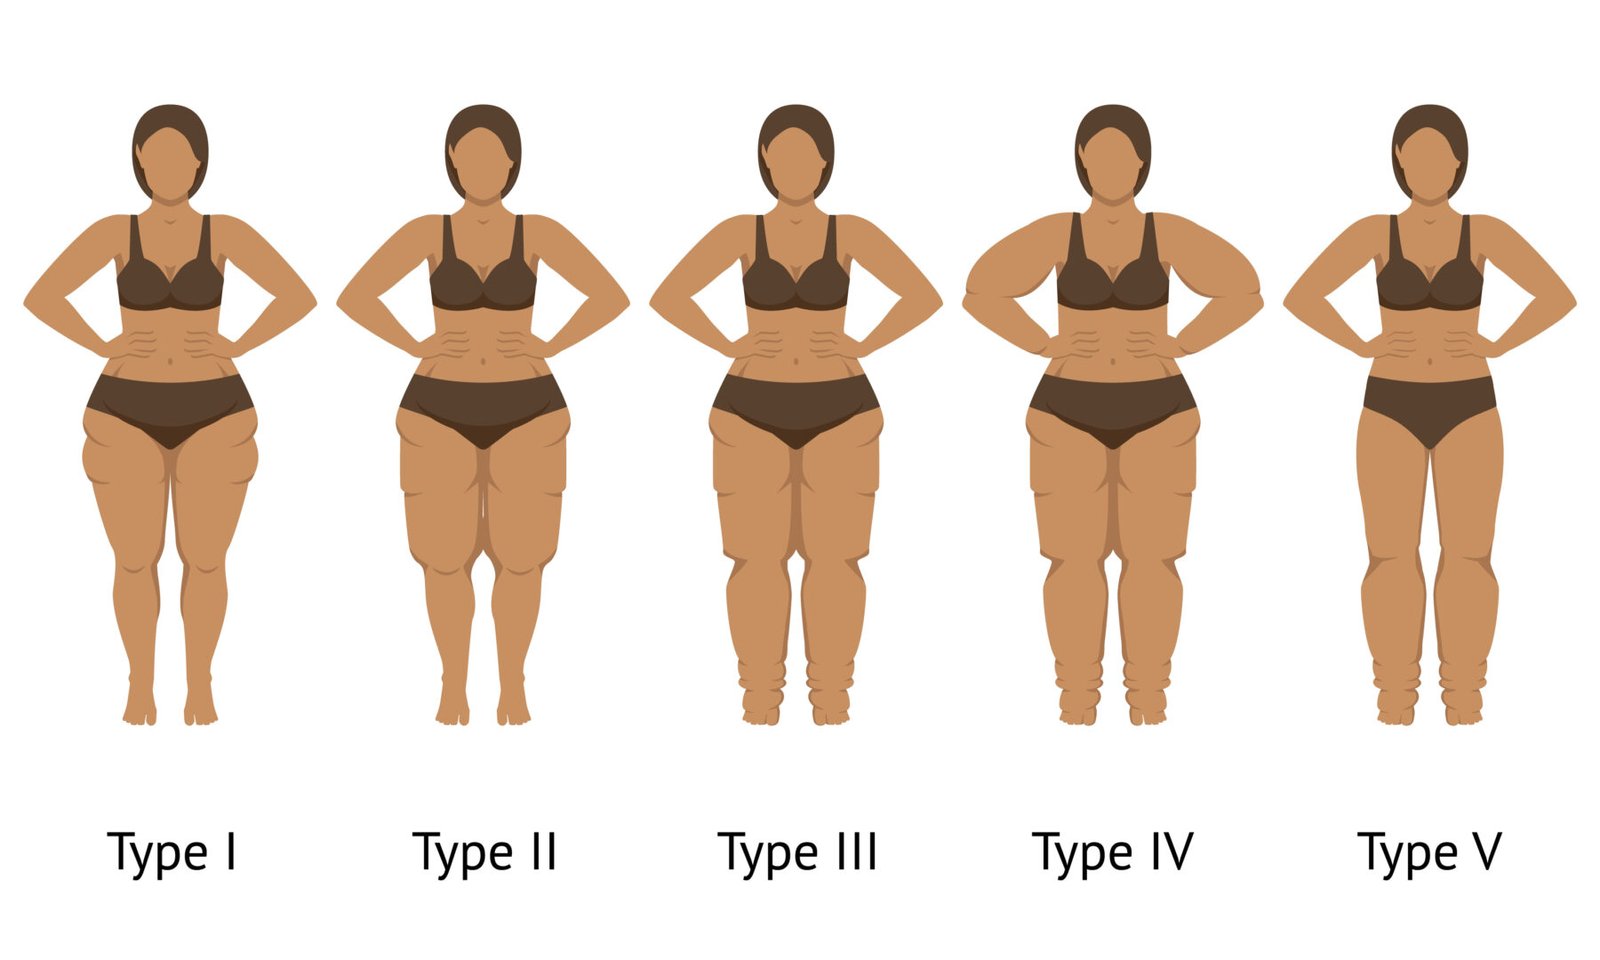 An image depicting the various stages of lipedema.